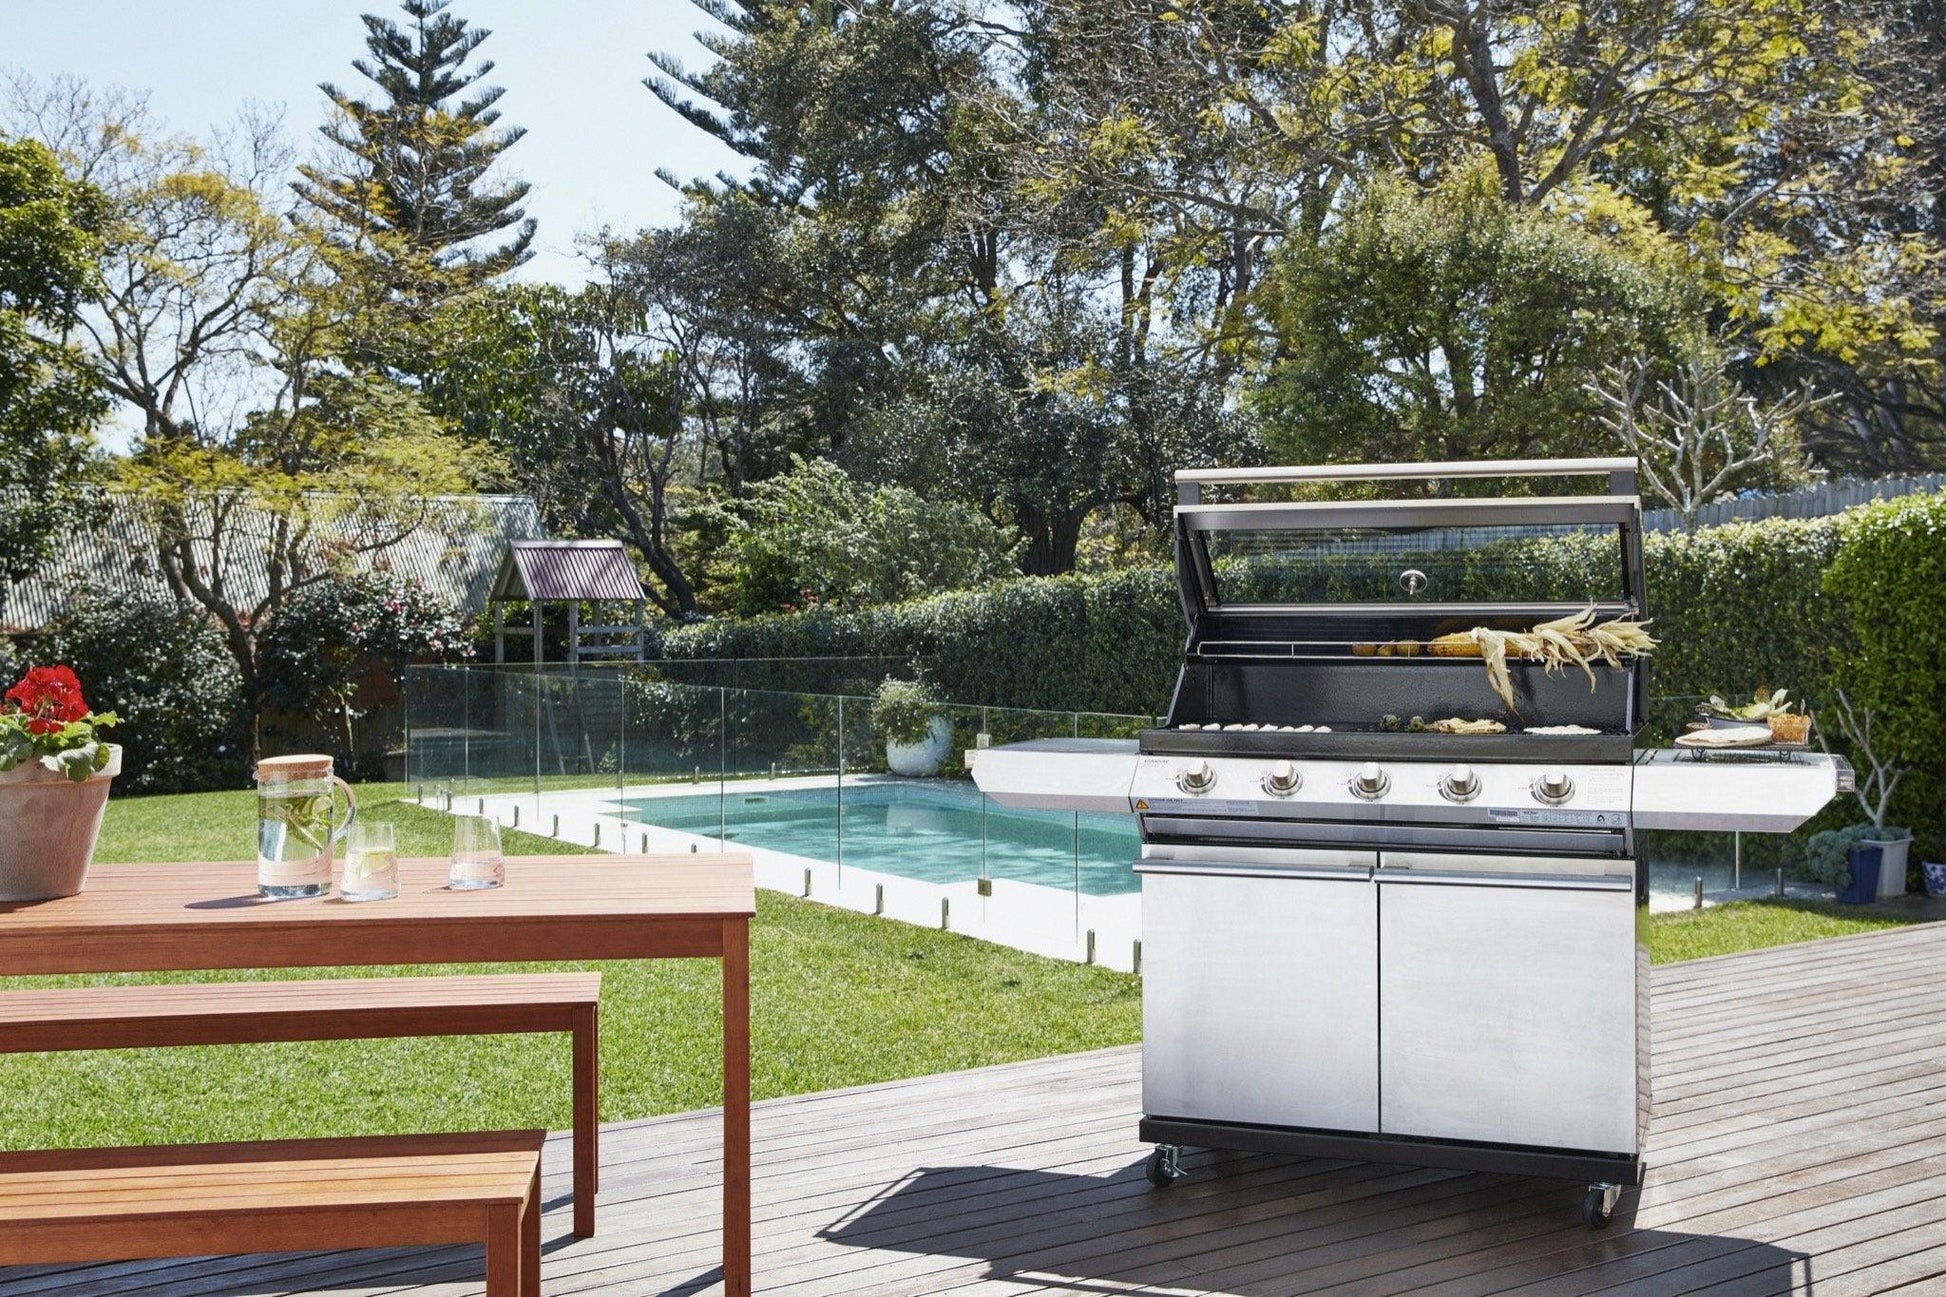 A modern outdoor patio showcasing a Brisks BeefEater 1200S Series 5 Burner BBQ & Trolley with its lid open and food grilling. The patio includes a wooden table with potted plants and drinks. A clear, fenced swimming pool is situated in a lush, green garden surrounded by trees and shrubs, perfect for outdoor living.